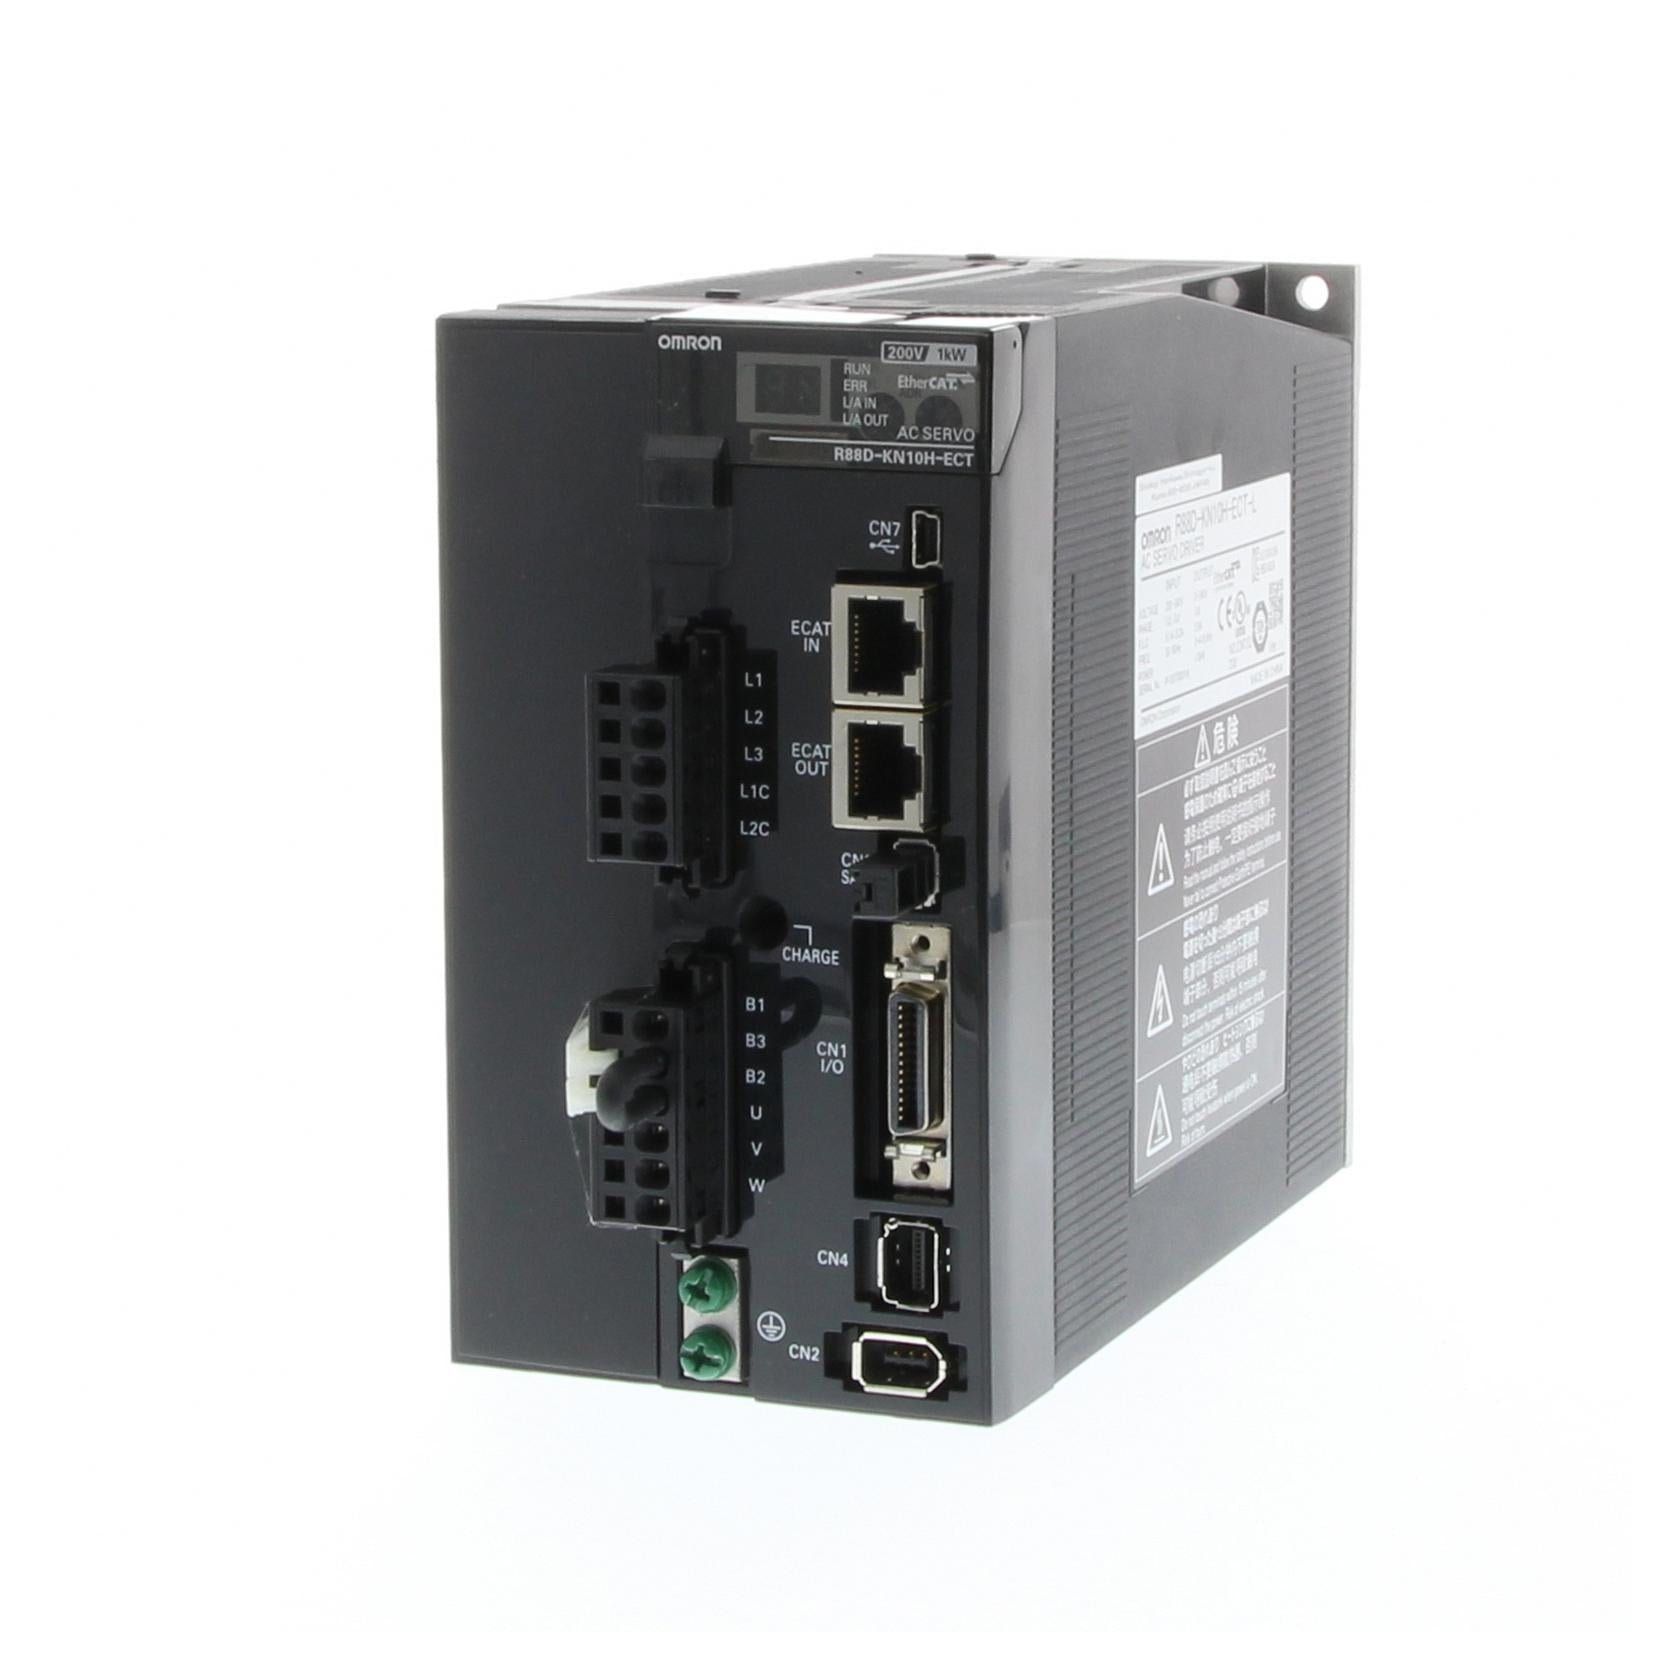 R88D-KN08H-ECT-L AC MOTOR SPEED CONTROLLERS OMRON